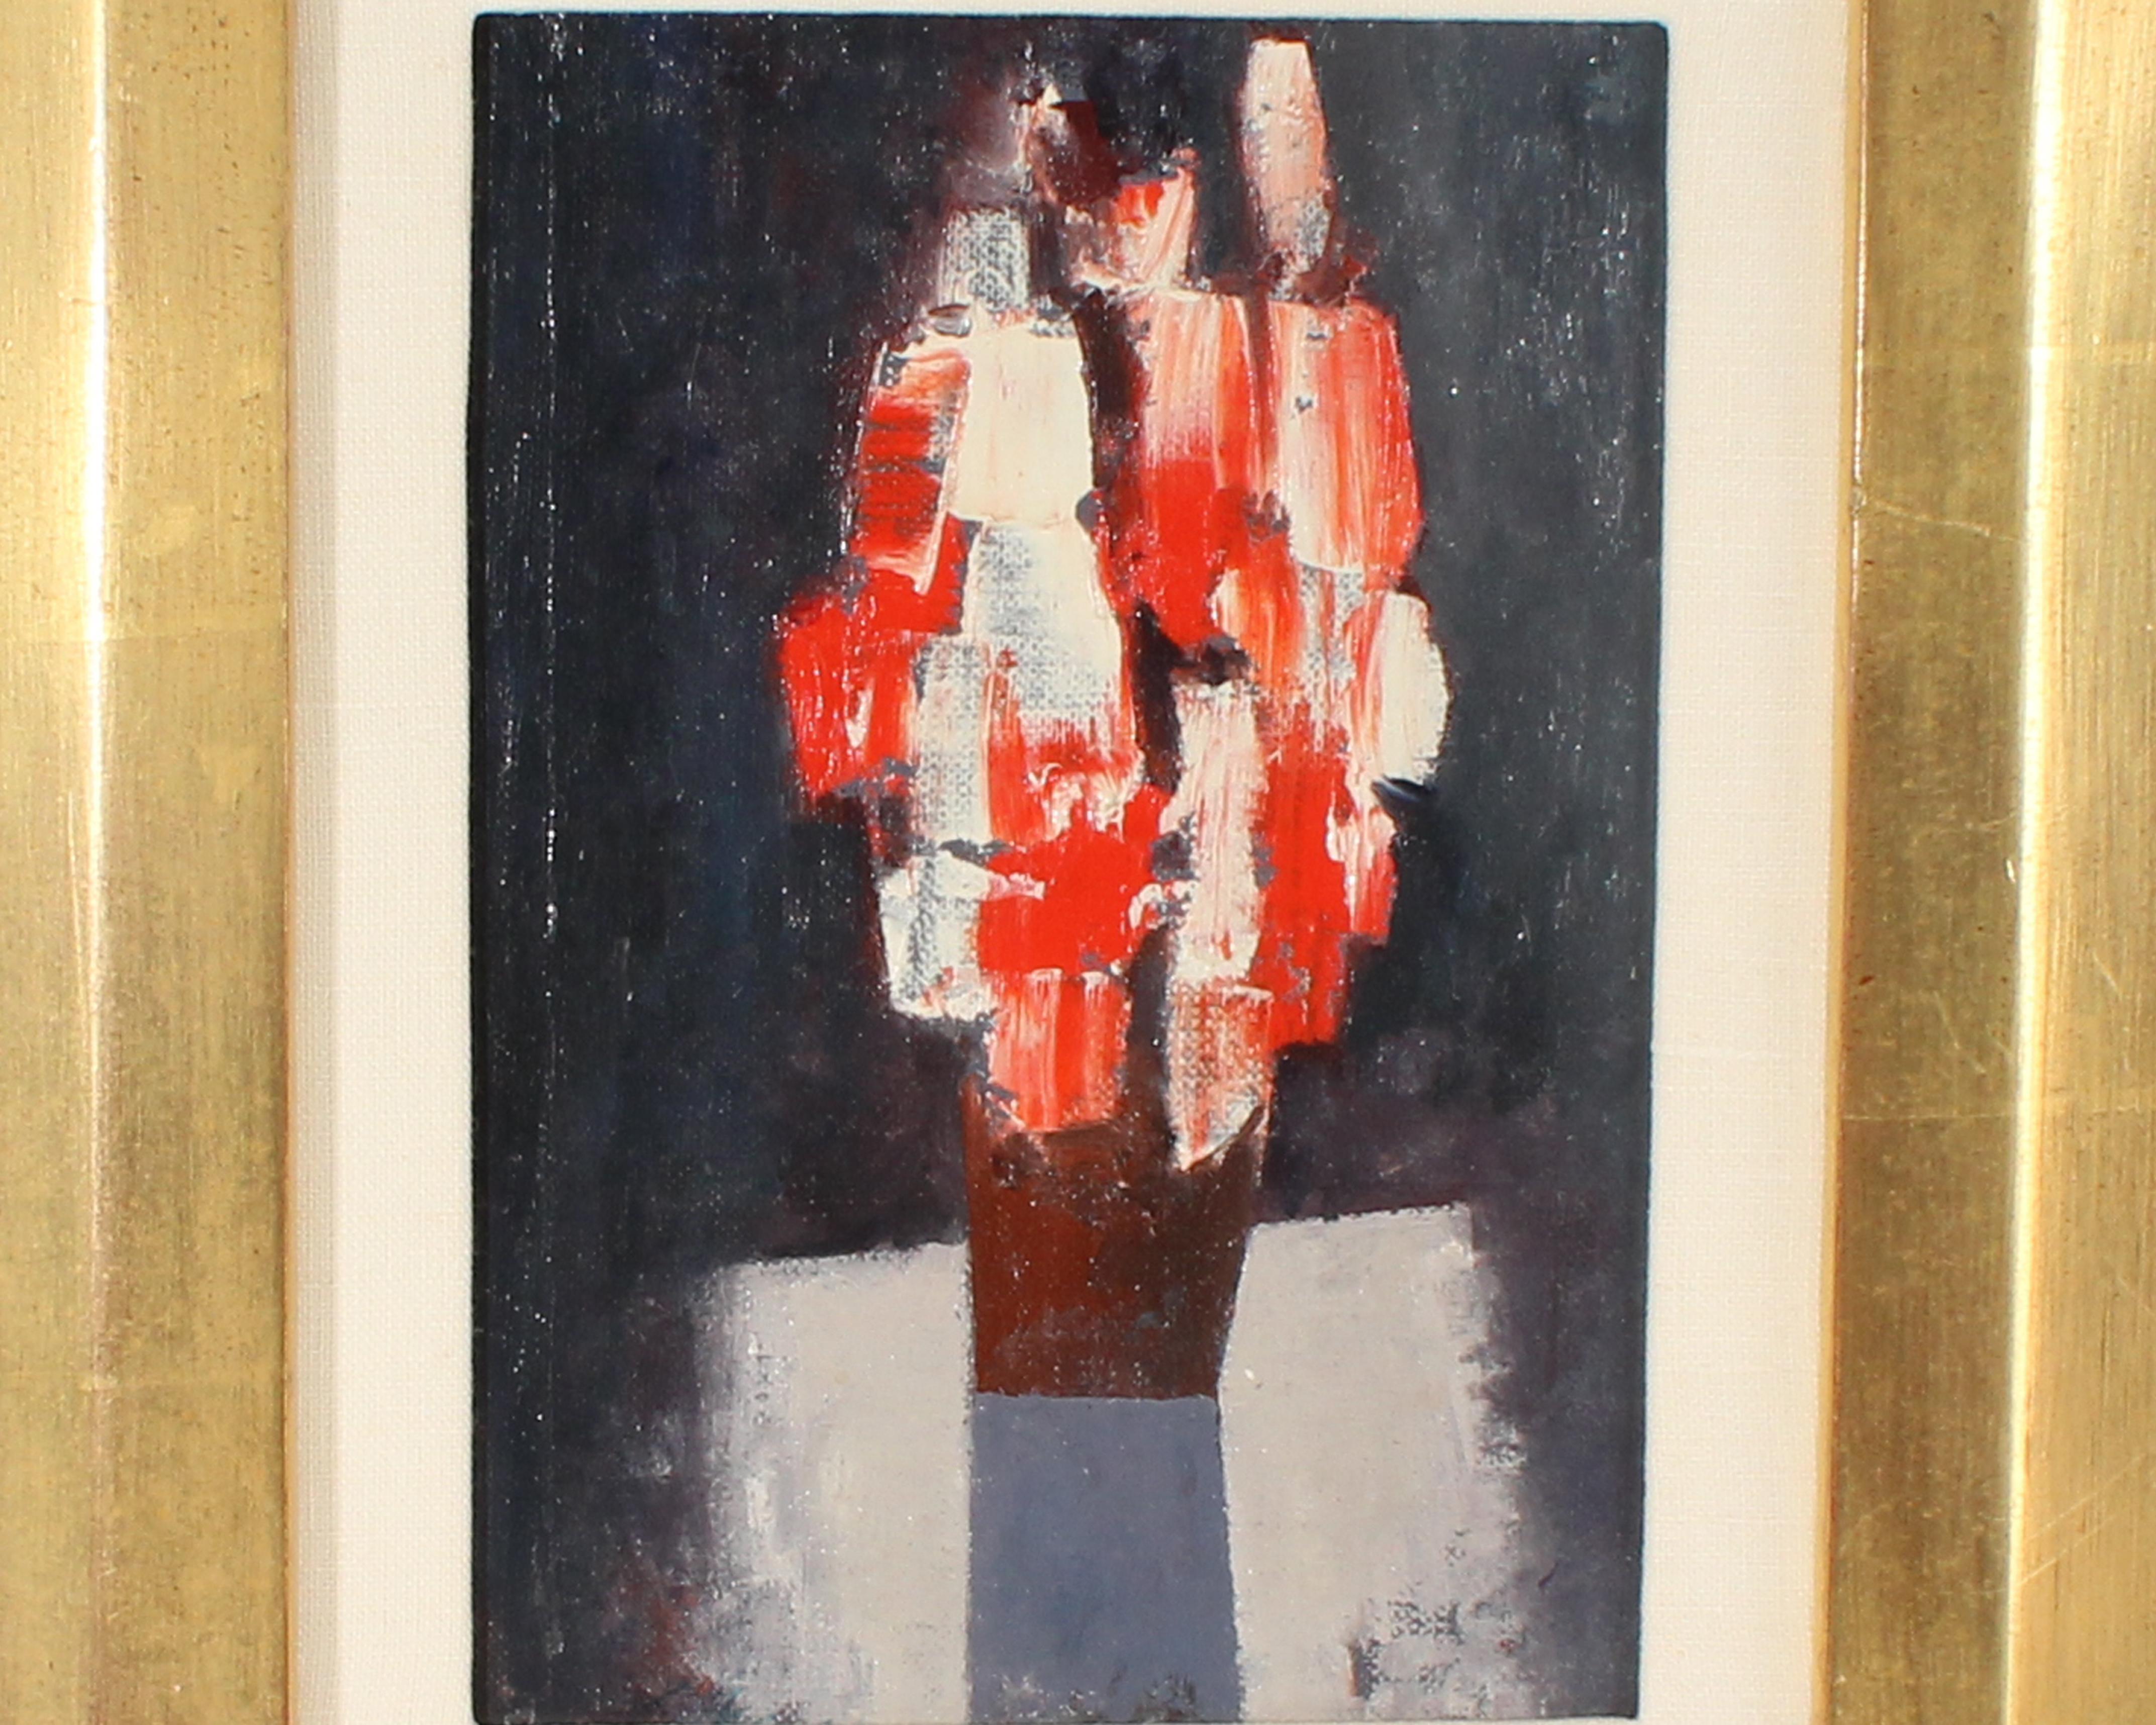 An oil on board painting by the American artist Charles Green Shaw (1892-1974). Signed to the lower left, the painting depicts an abstract still life scene with a bouquet of red and white flowers in a vase. The painting is displayed in a gold tone